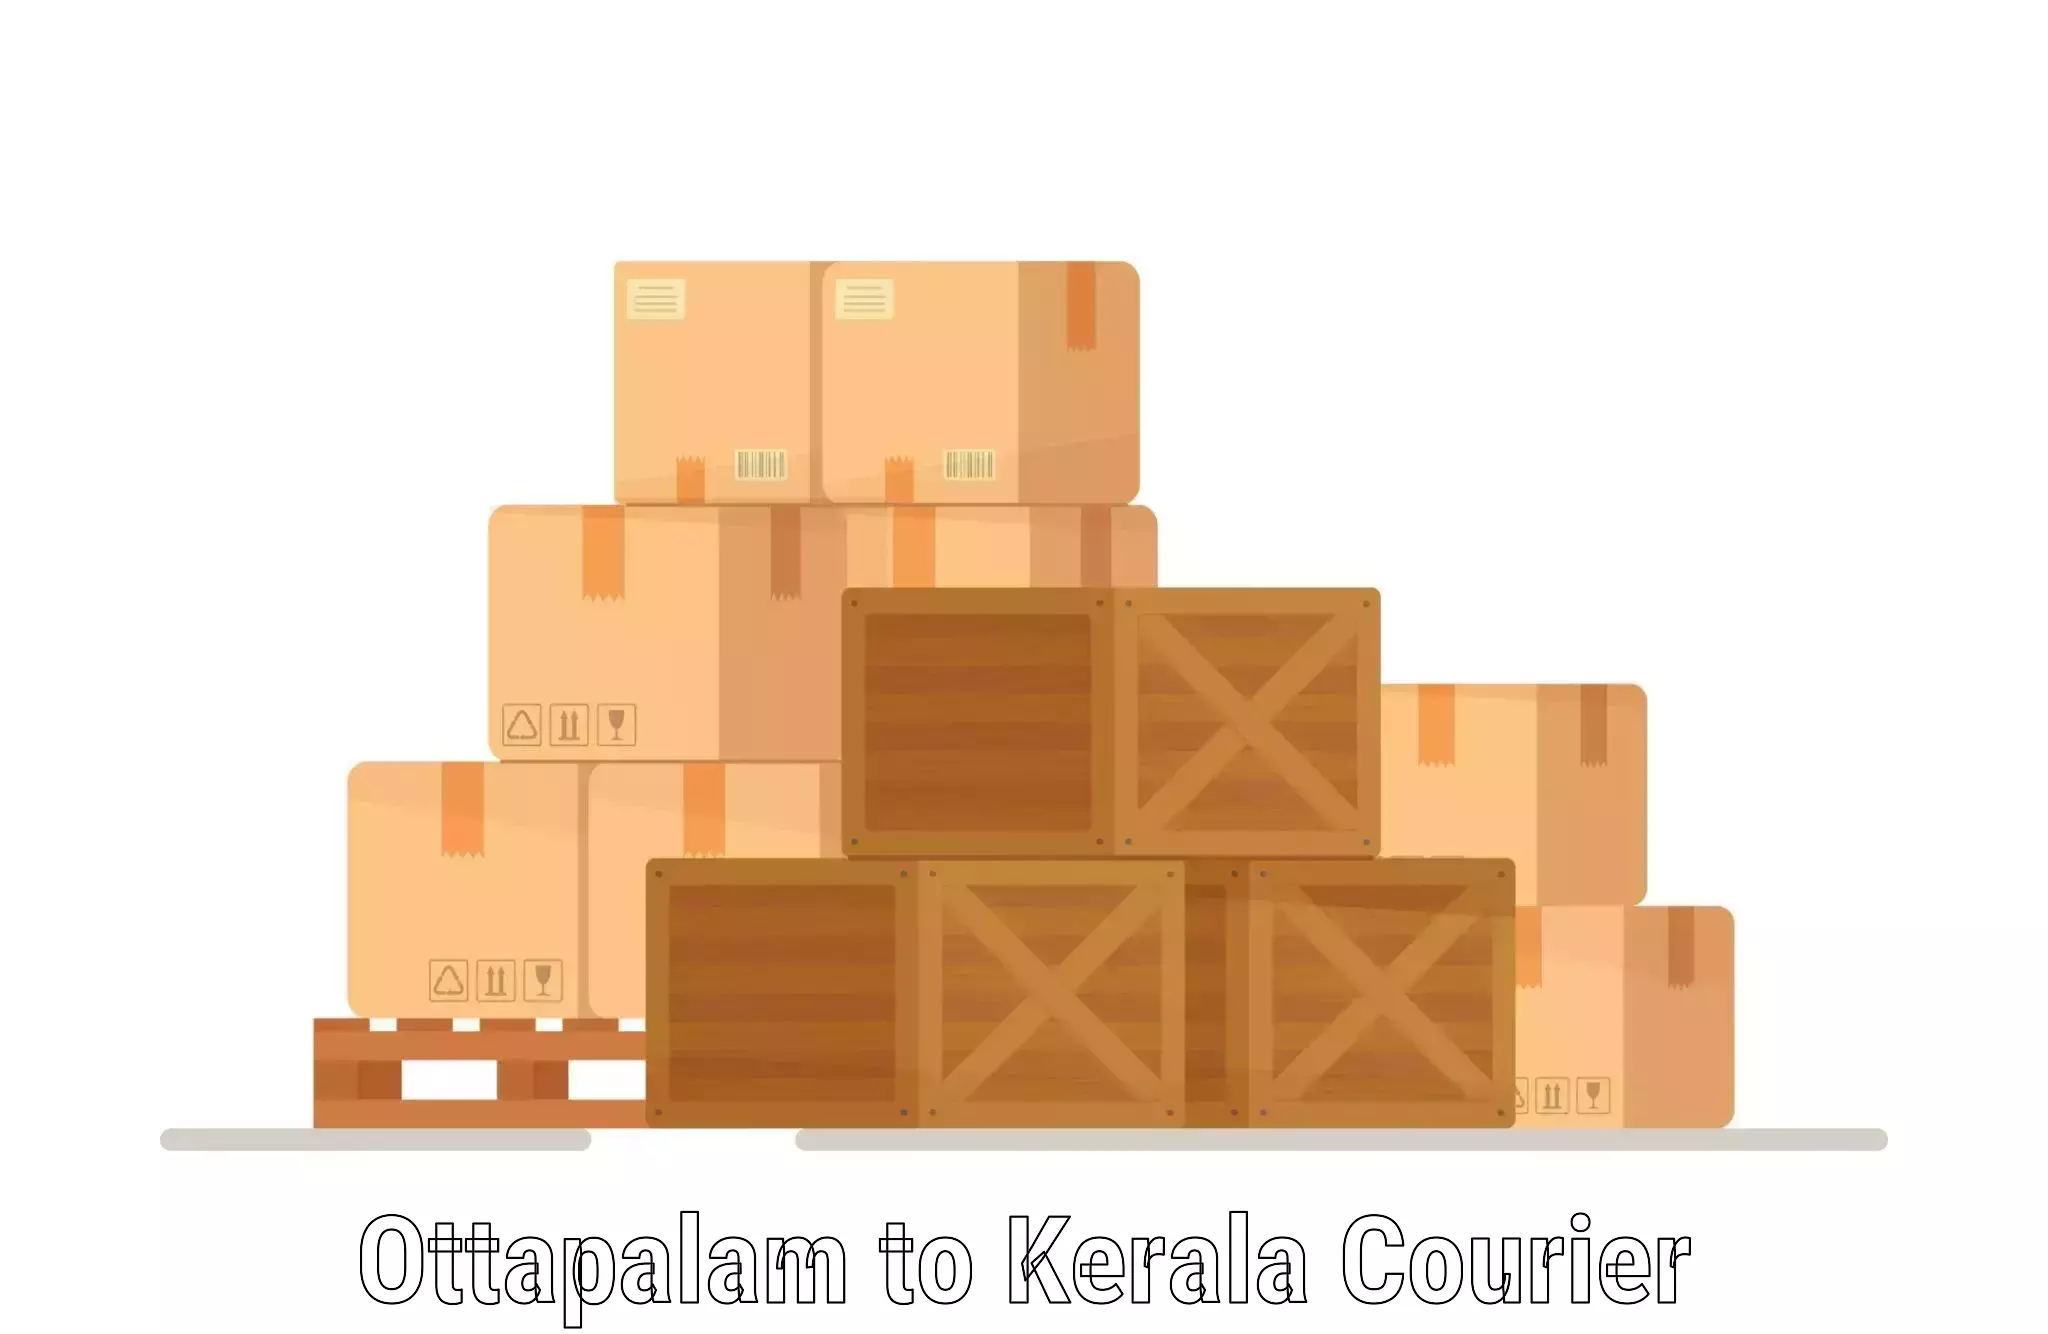 High-speed parcel service Ottapalam to Pala